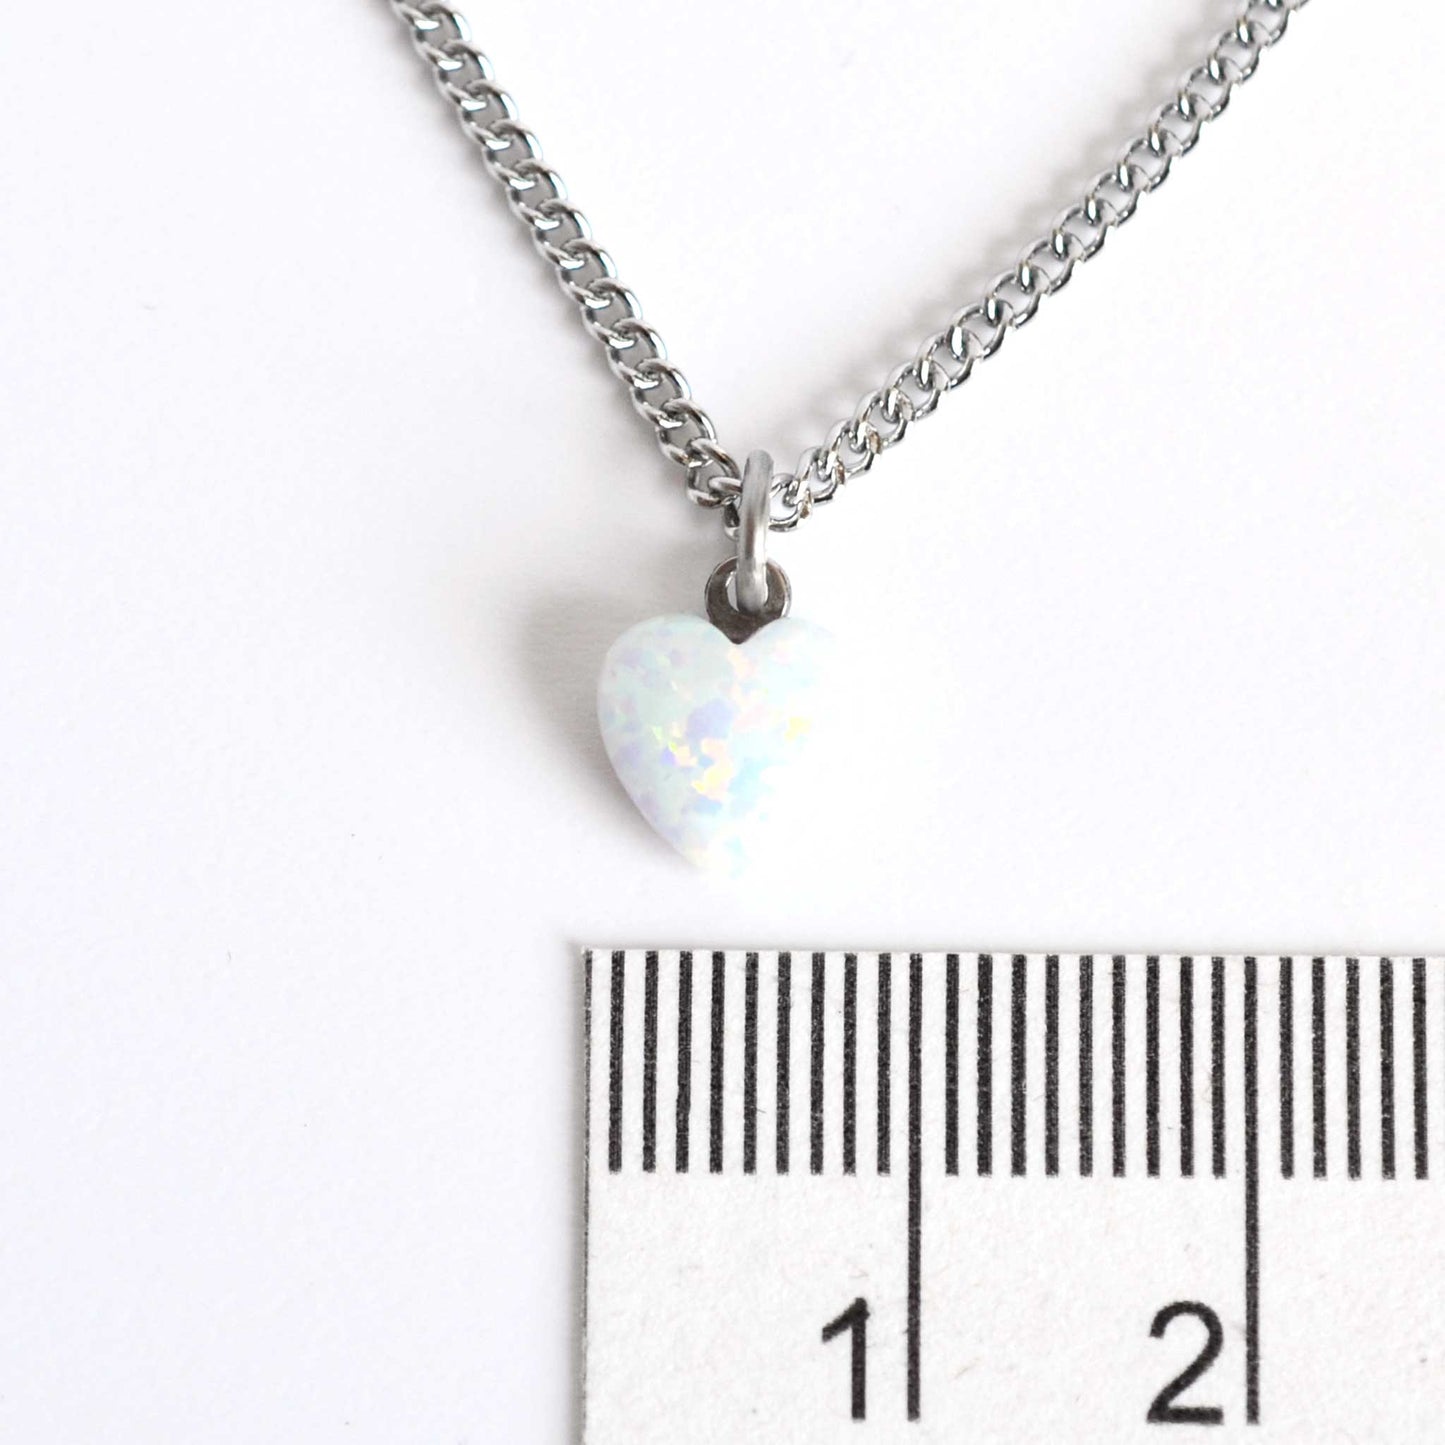 8mm dainty white Opal heart necklace next to ruler